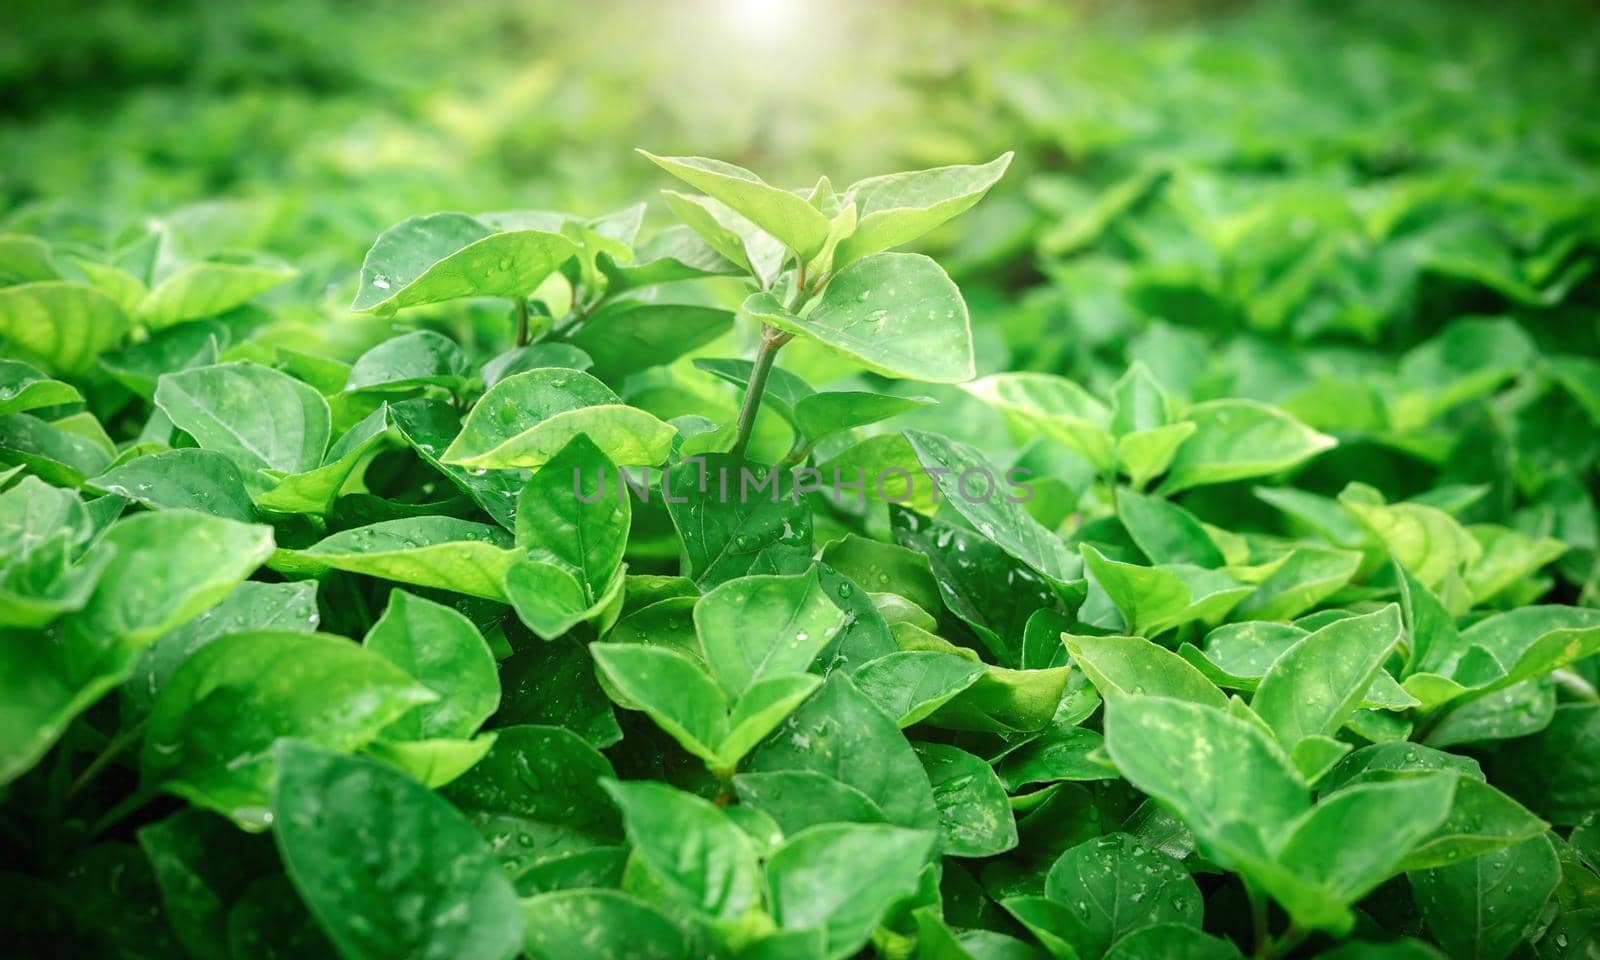 Selective focus of green laves of plant with beautiful sunlight, abstract background texture and nature concepts.